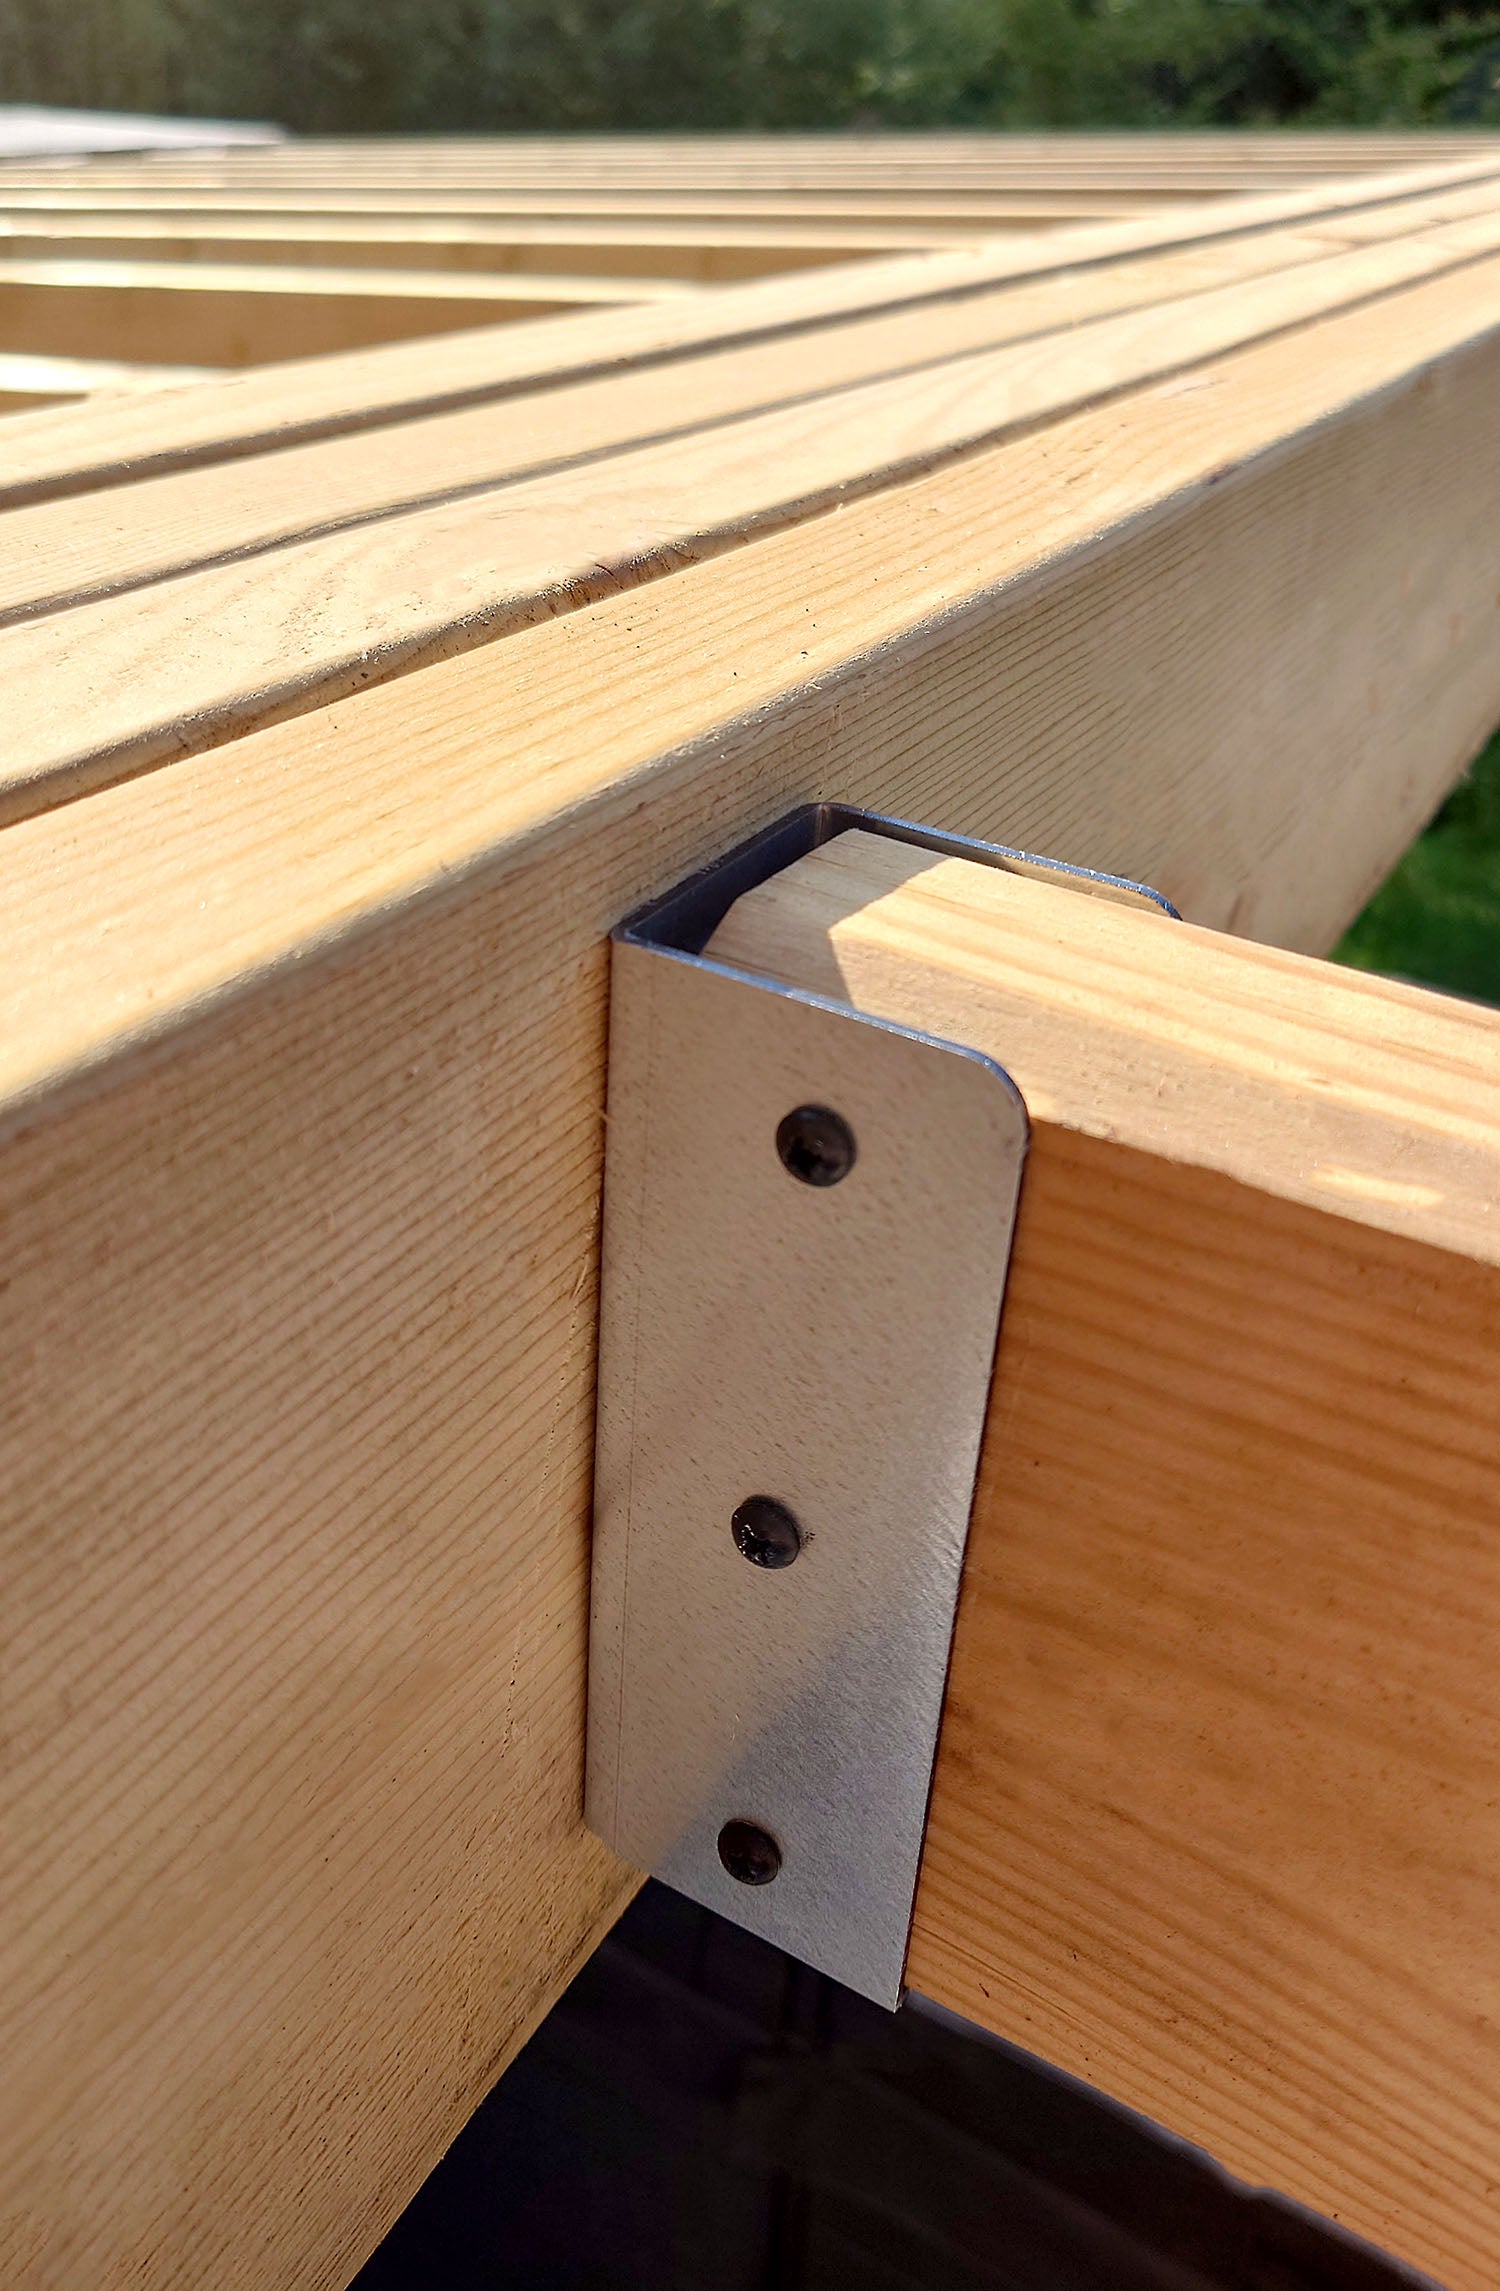 Framola™ Extra Strong Timber Rafter Bracket - Suitable for 6" x 2" Timber - Indoor Outdoors